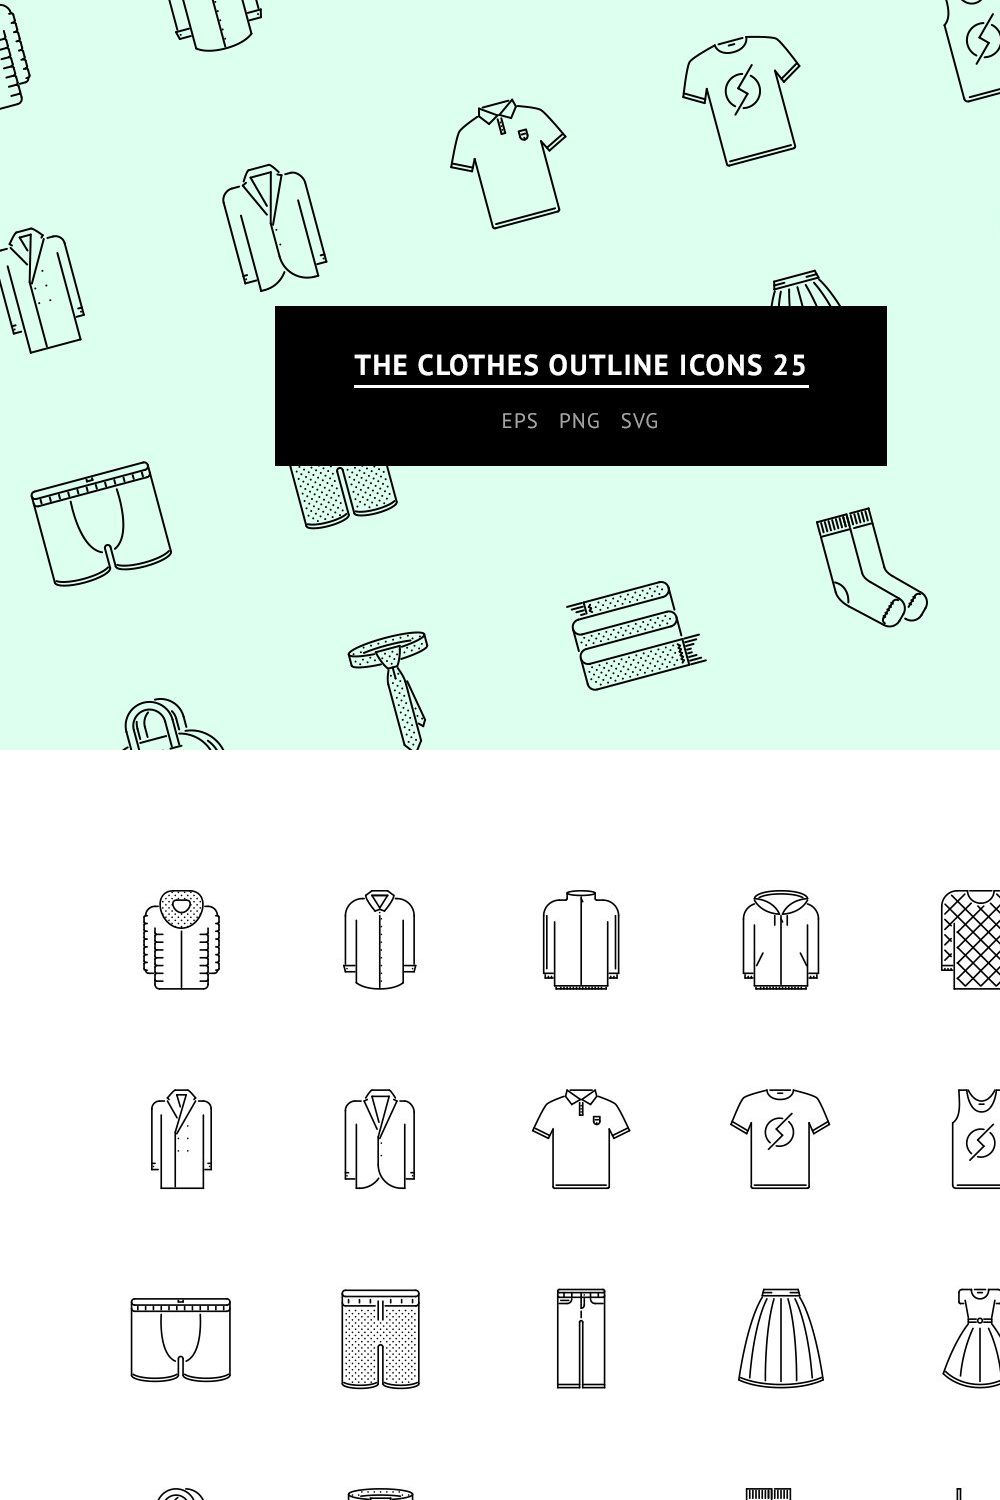 The Clothes Outline Icons 25 pinterest preview image.